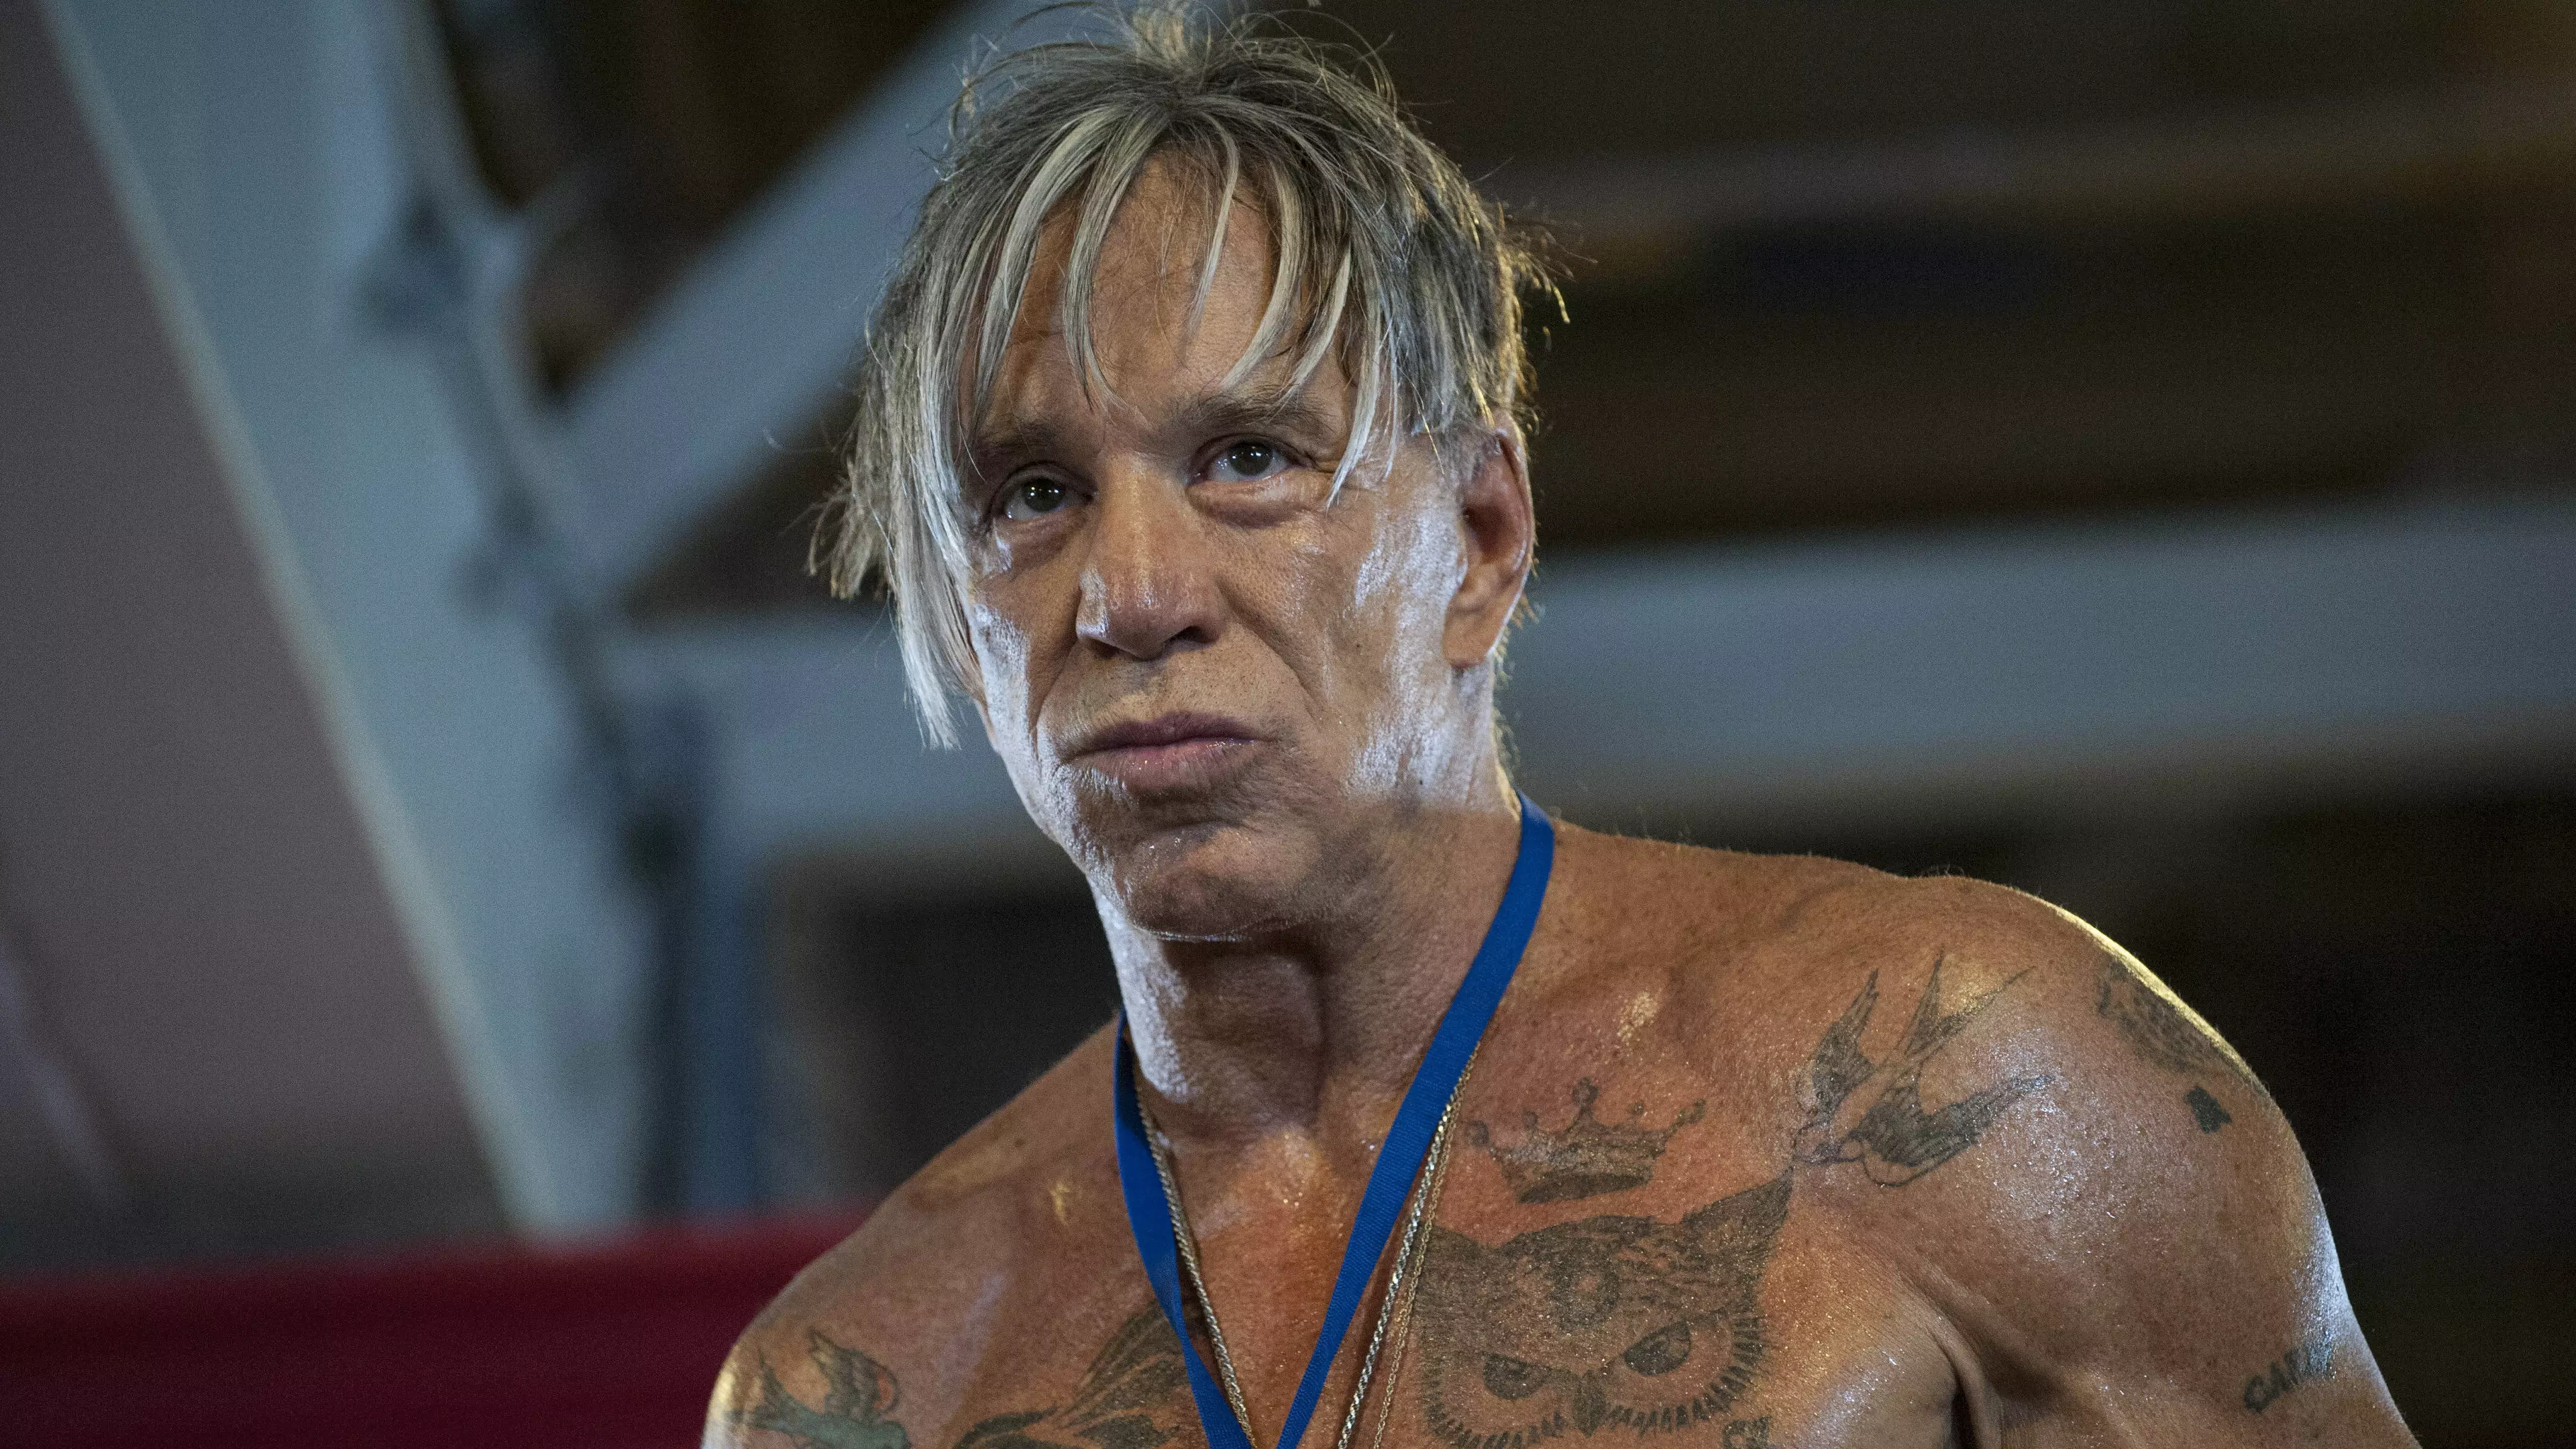 Mickey Rourke Has Challenged Elon Musk To A Bare-Knuckle Fight